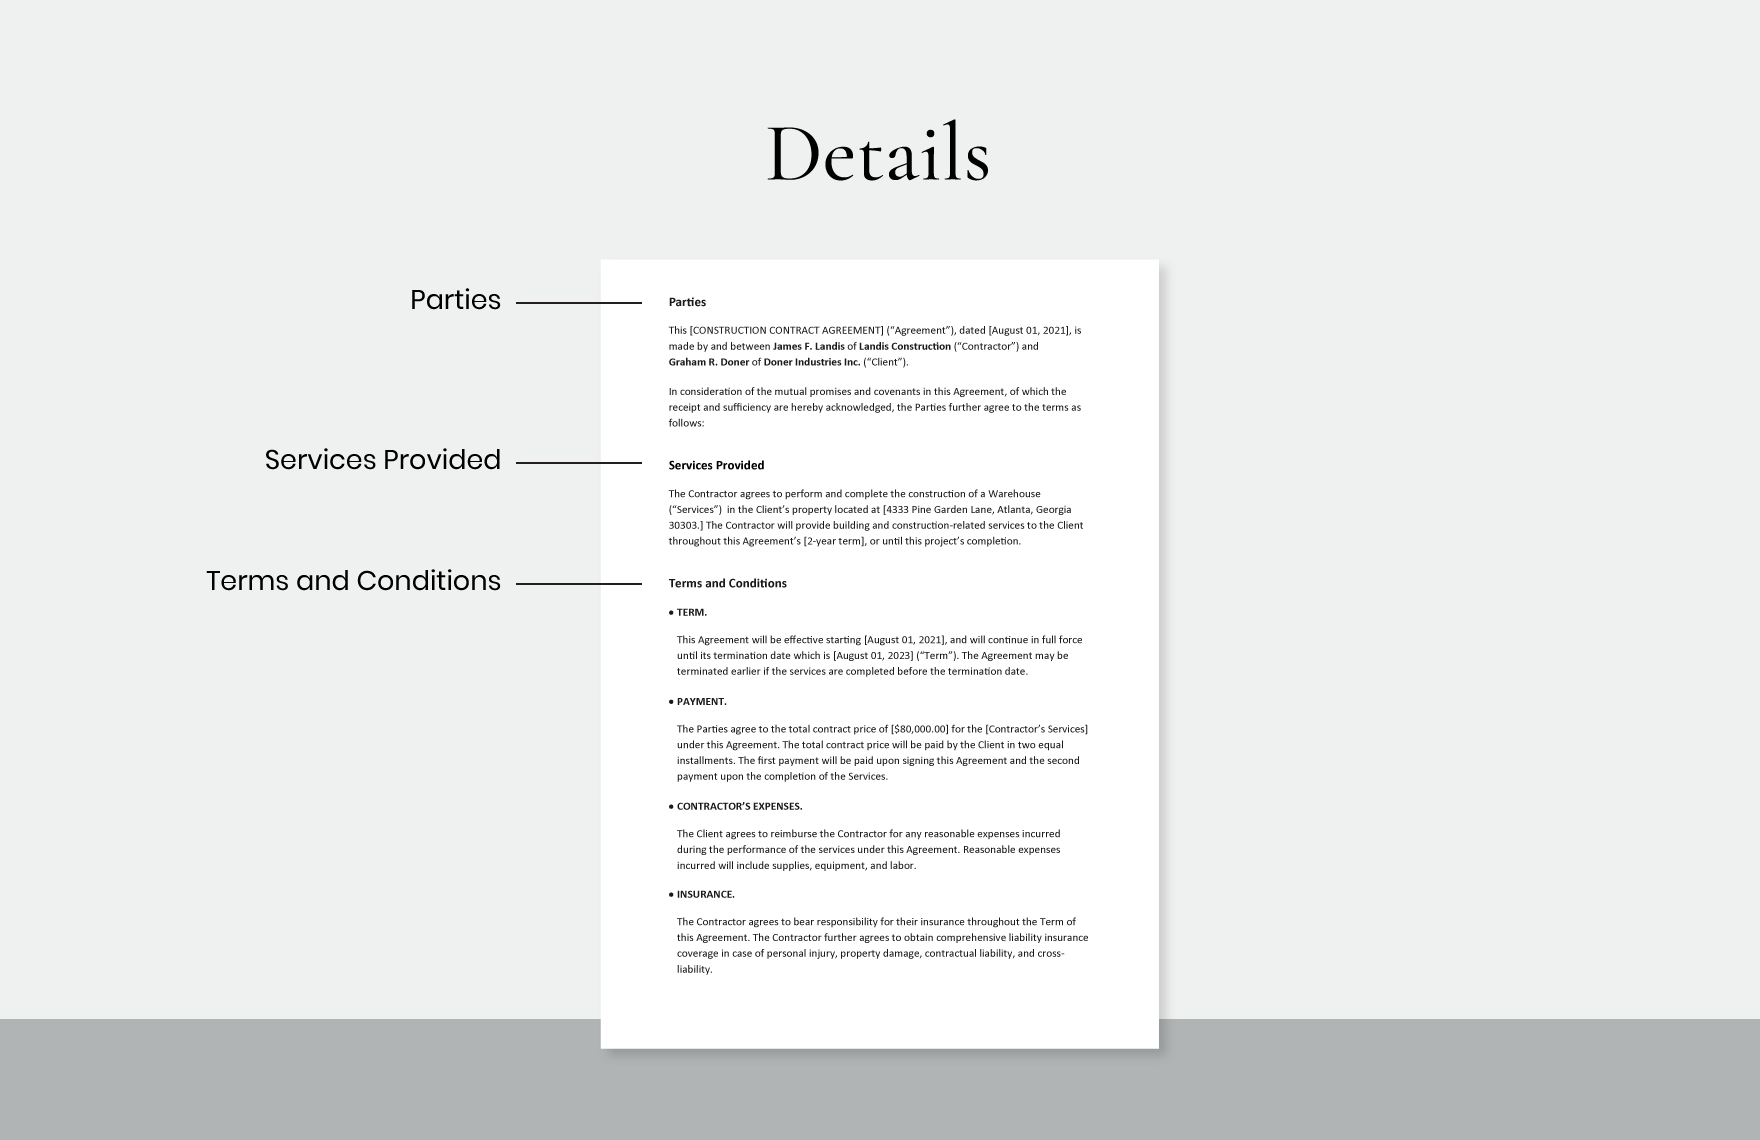 Construction Contract Agreement Template